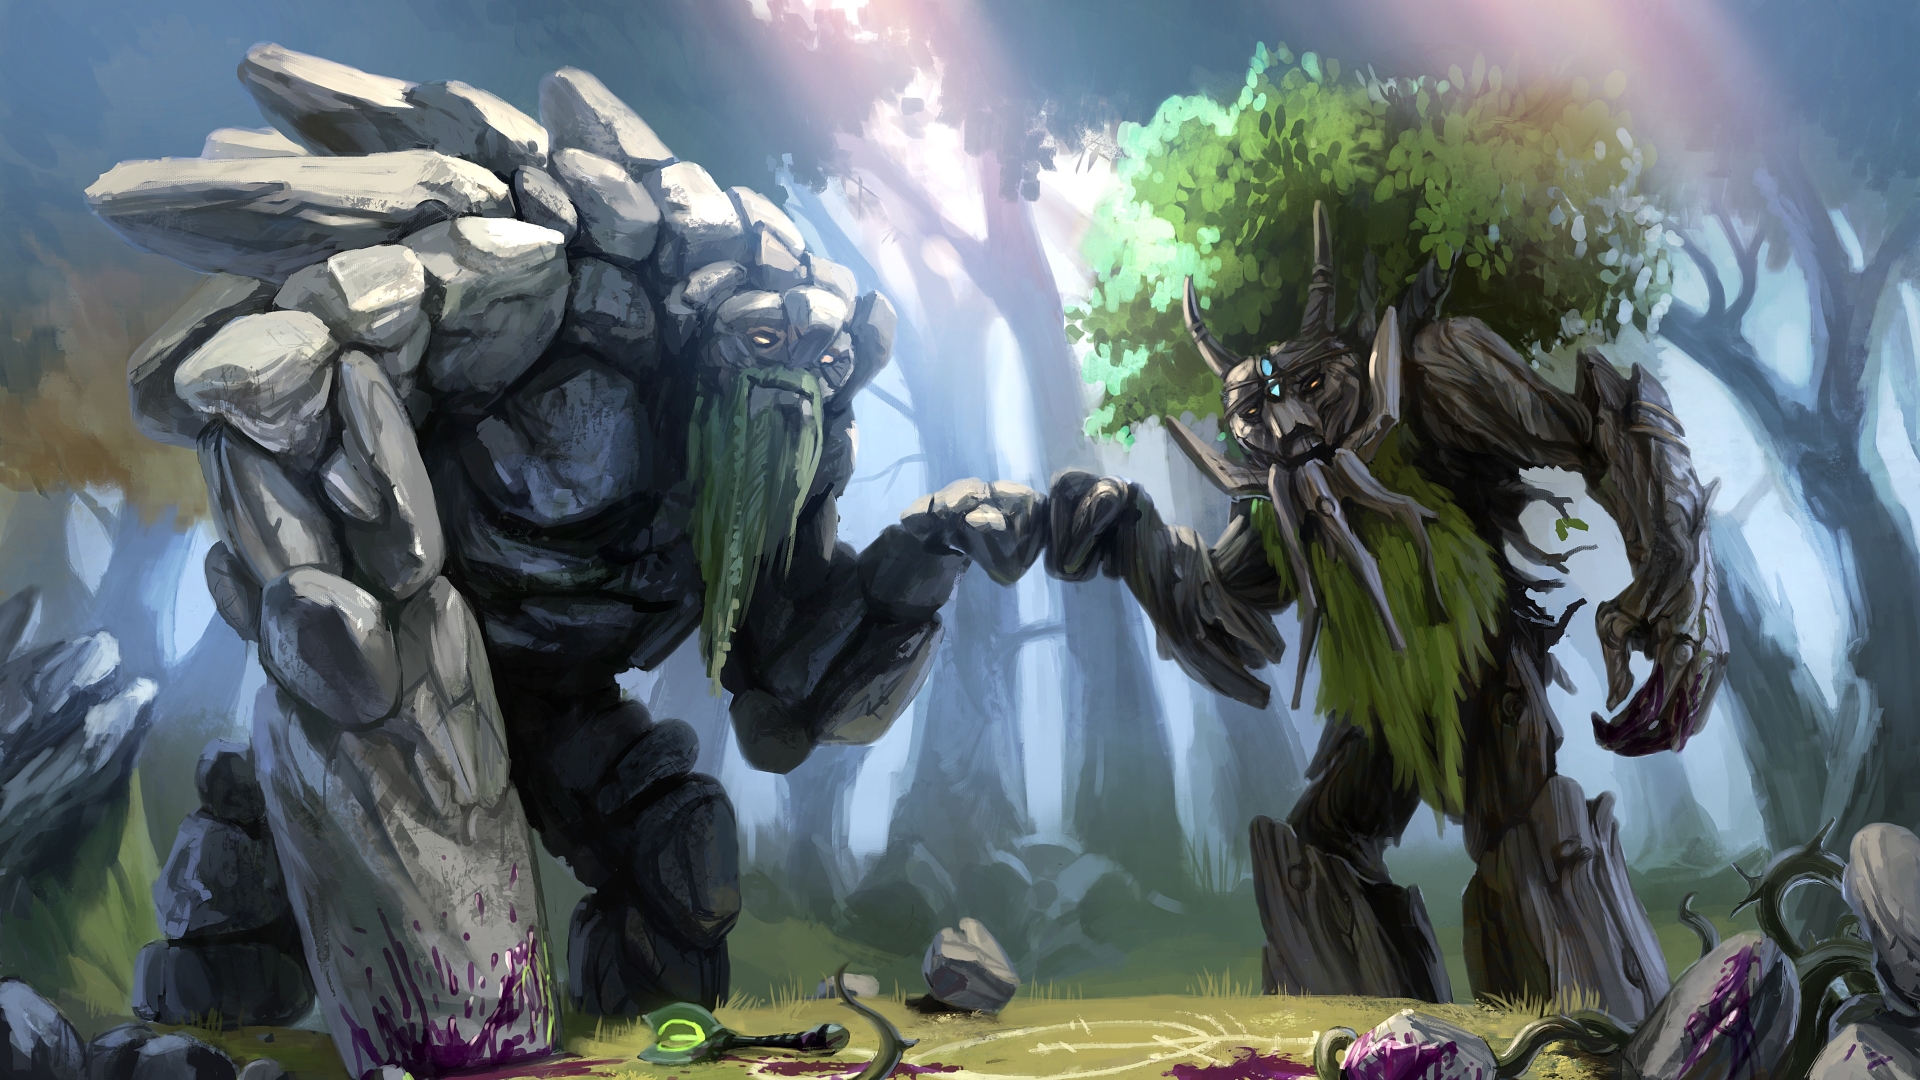 1920x1080 Dota 2 Treant Protector Trees 1080p Laptop Full Hd Images, Photos, Reviews